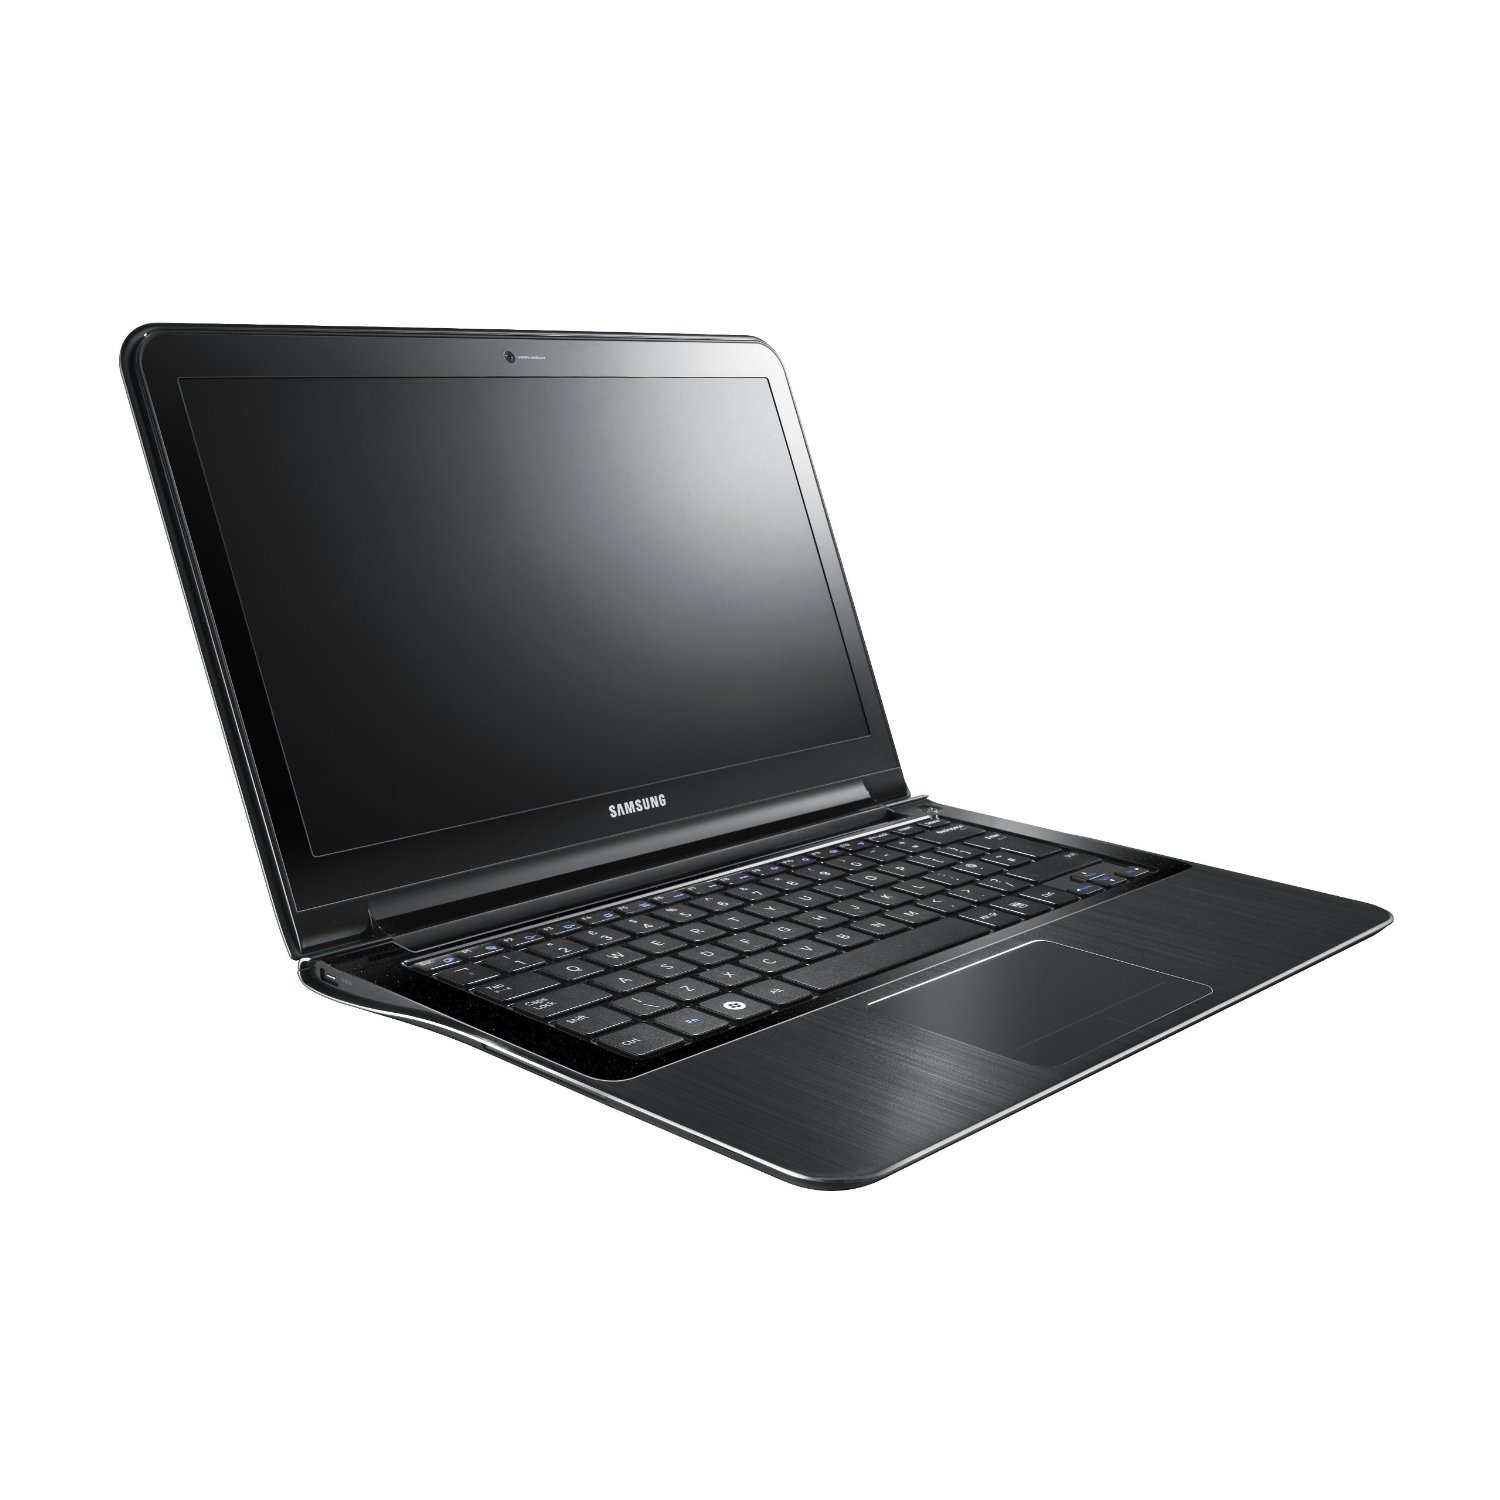 http://thetechjournal.com/wp-content/uploads/images/1108/1312961318-samsung-series-9-np900x3aa02us-133inch-laptop-6.jpg